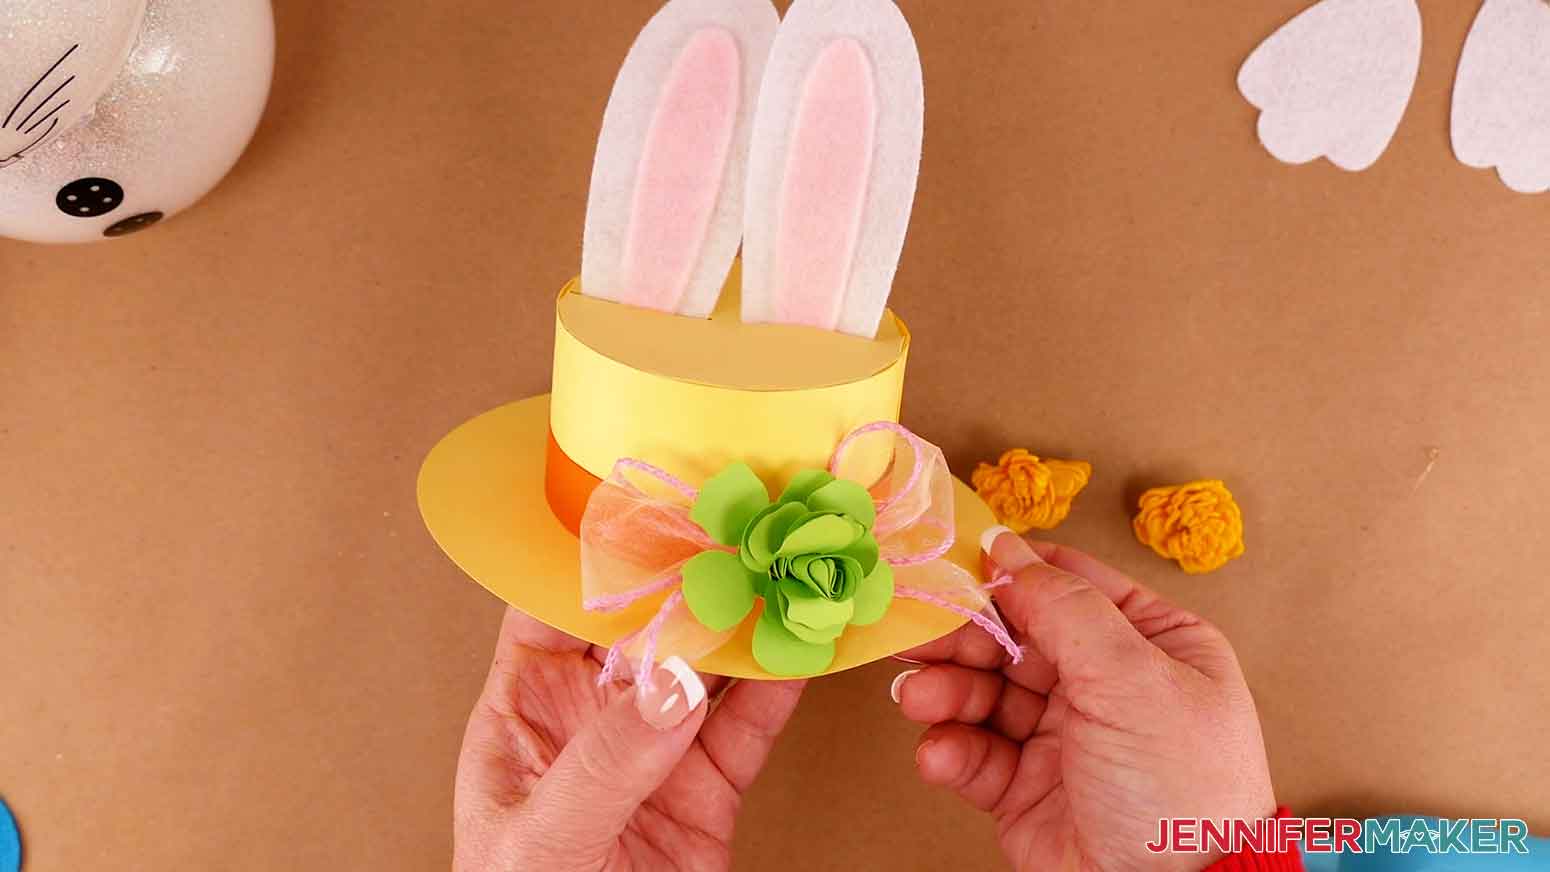 Decorate your bunny hat with ribbon, paper flowers, or other decorations.